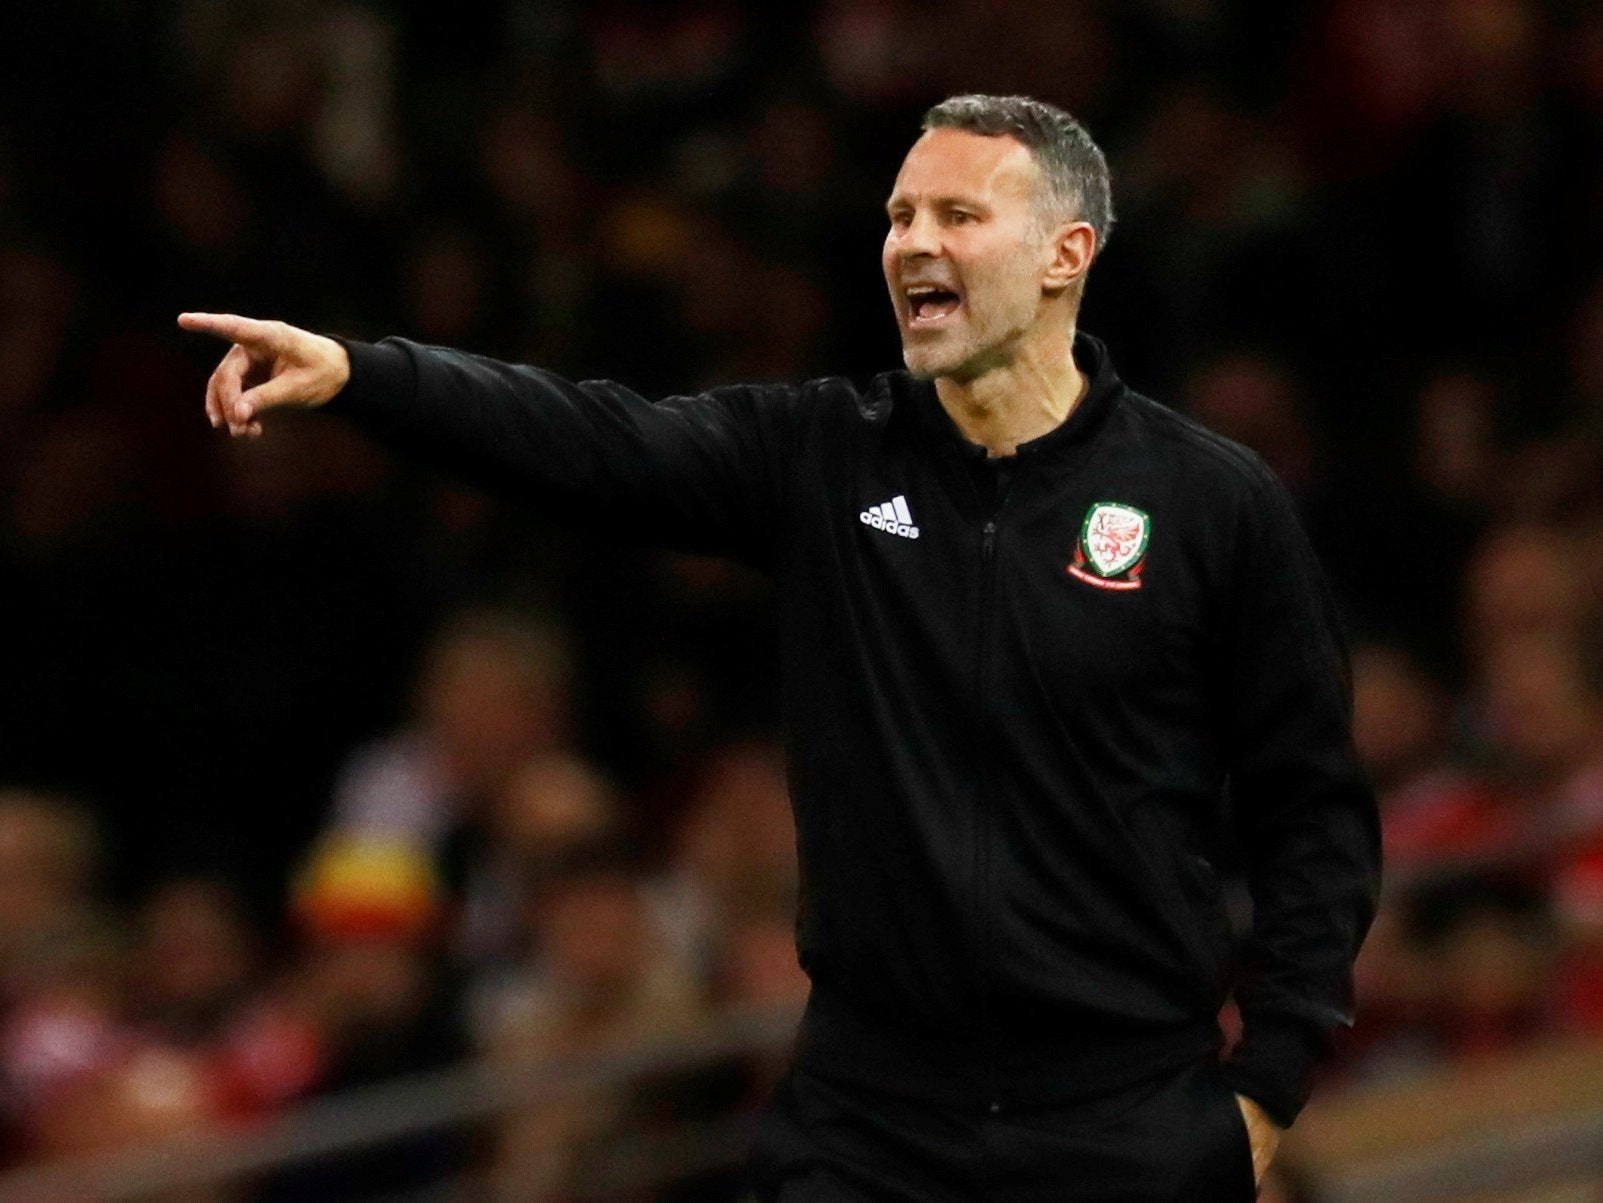 Giggs served as United assistant before taking the Wales job